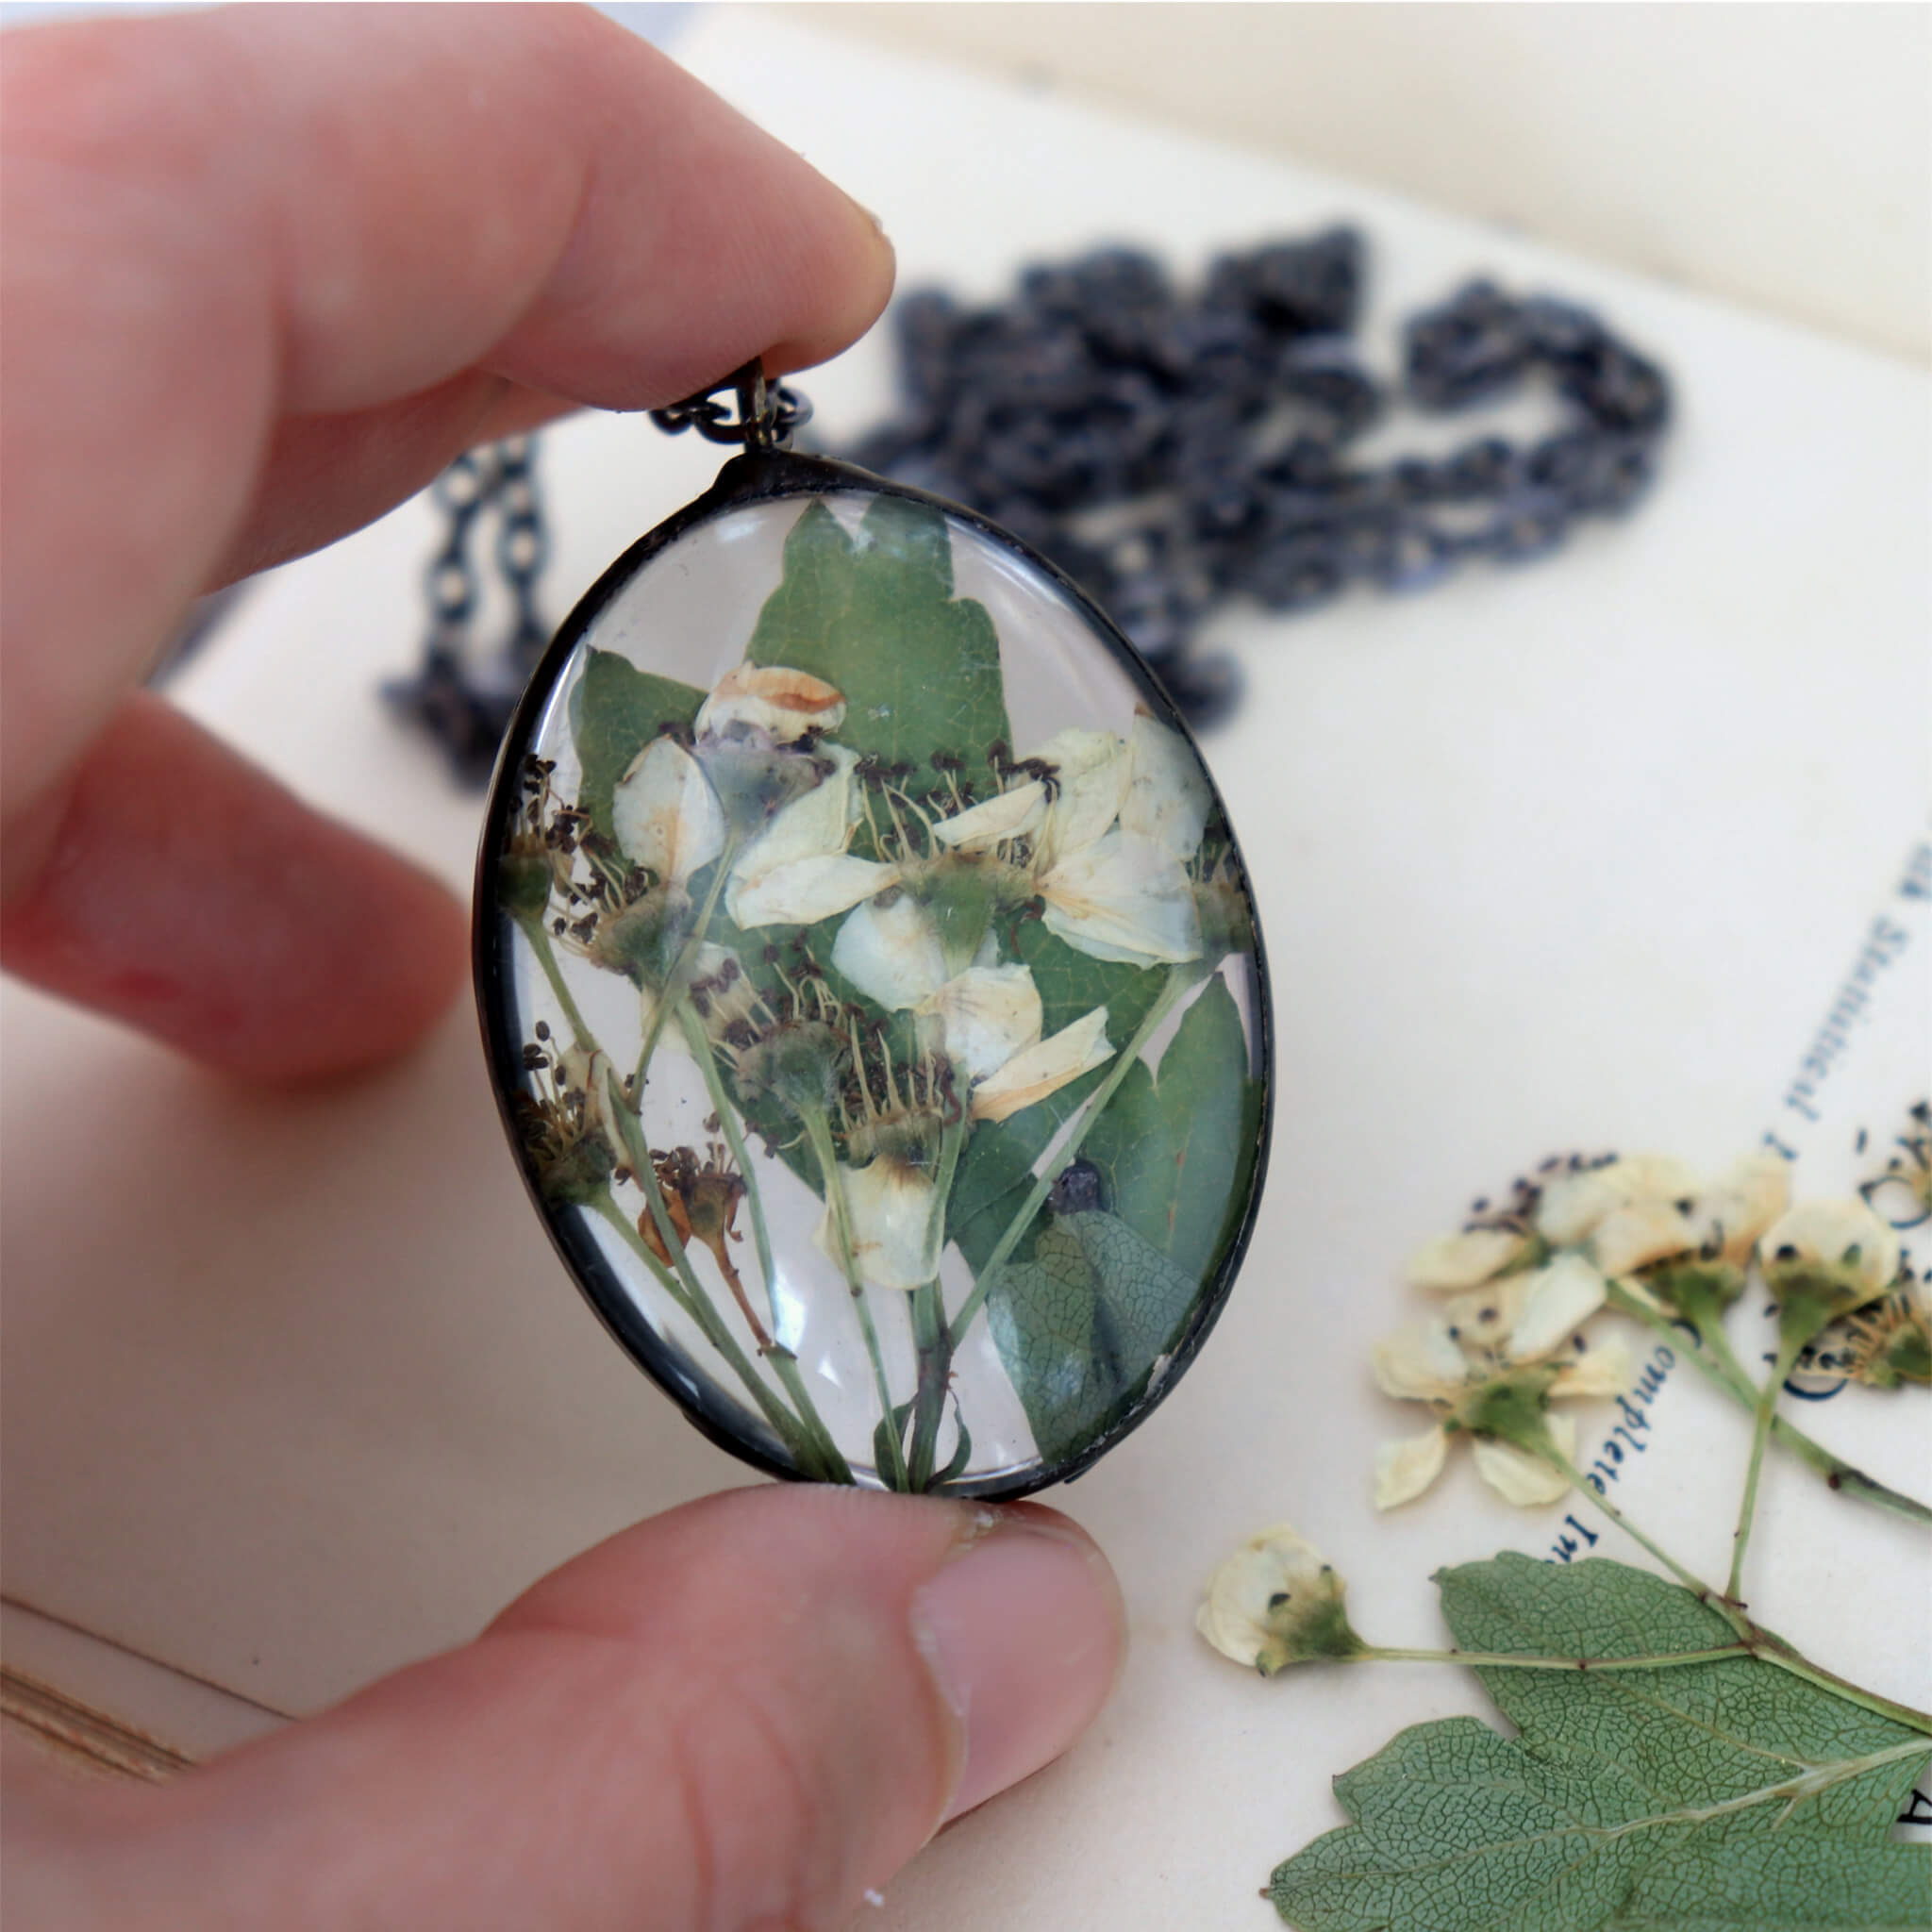 Hand holding a oval shaped glass necklace with hawthorn flowers inside